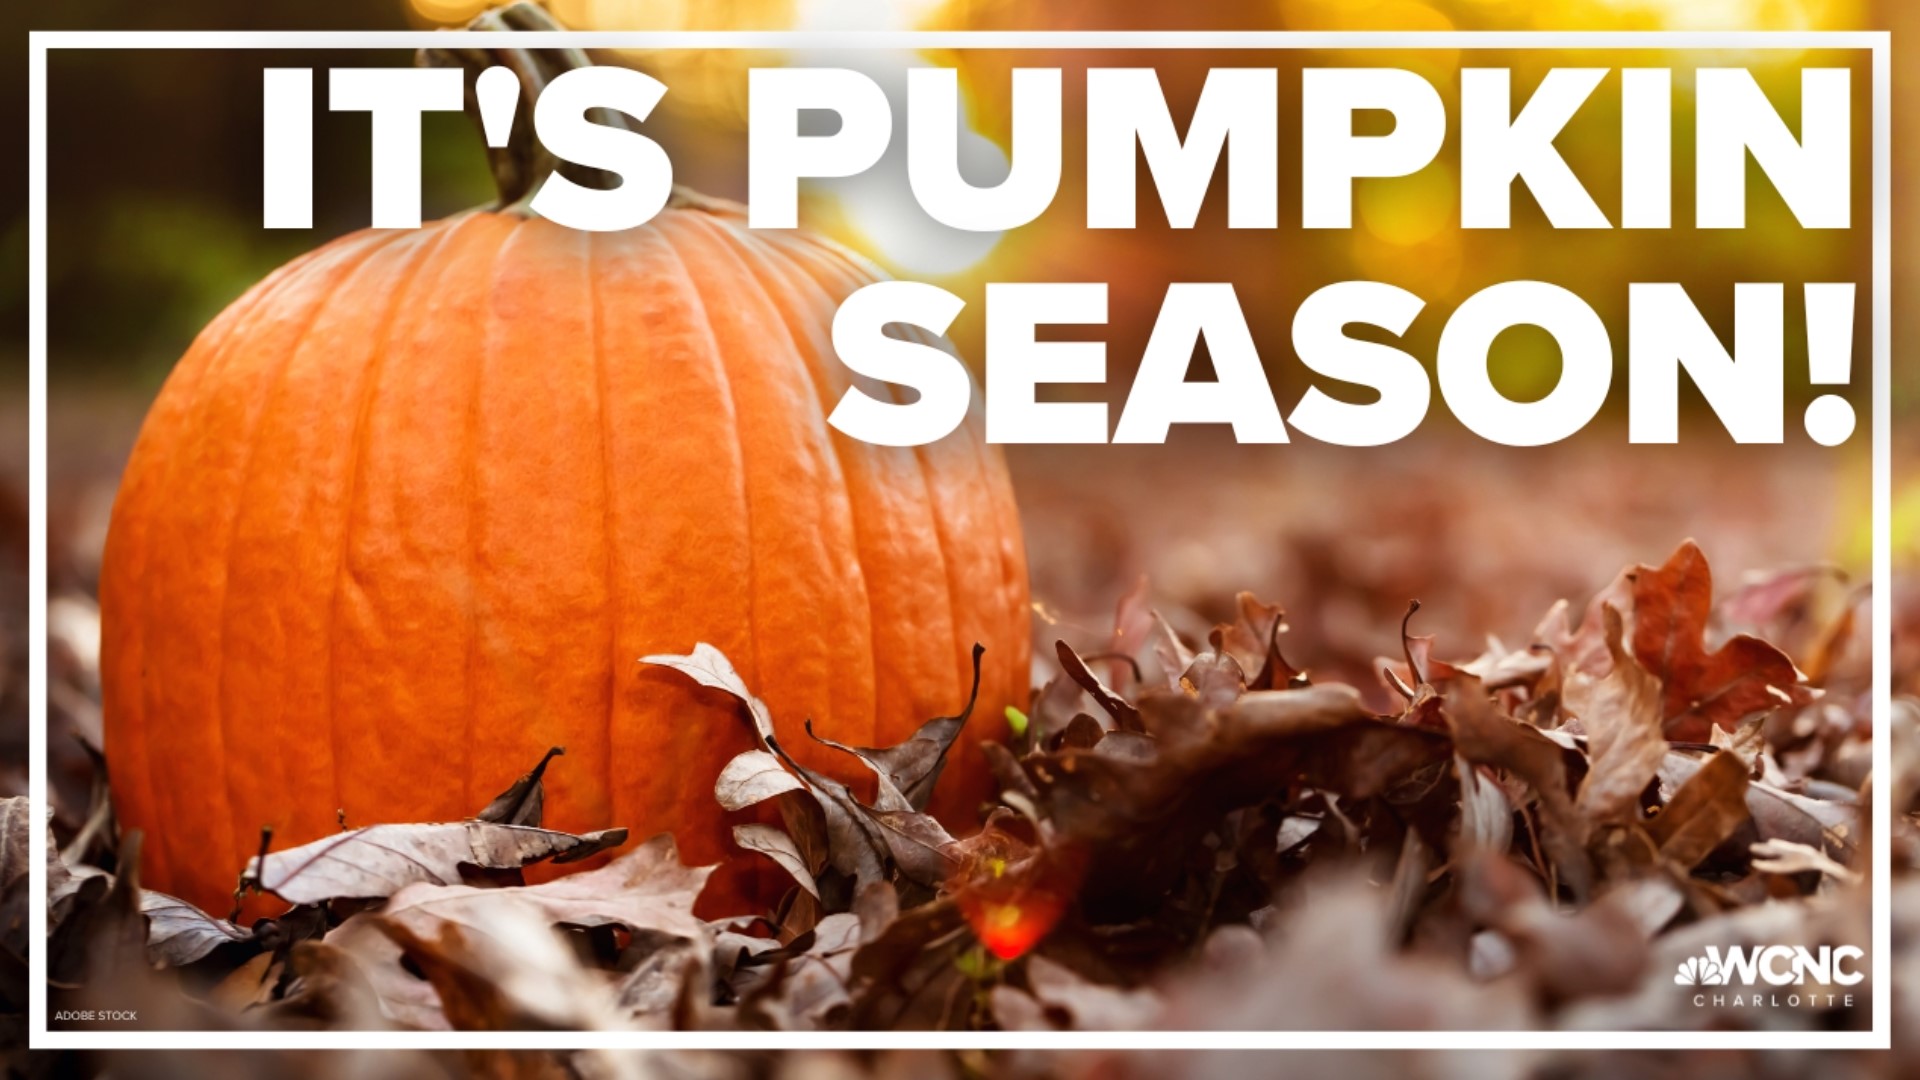 Thanks to the recent weather, you may have an easier time finding a jack-o-lantern.